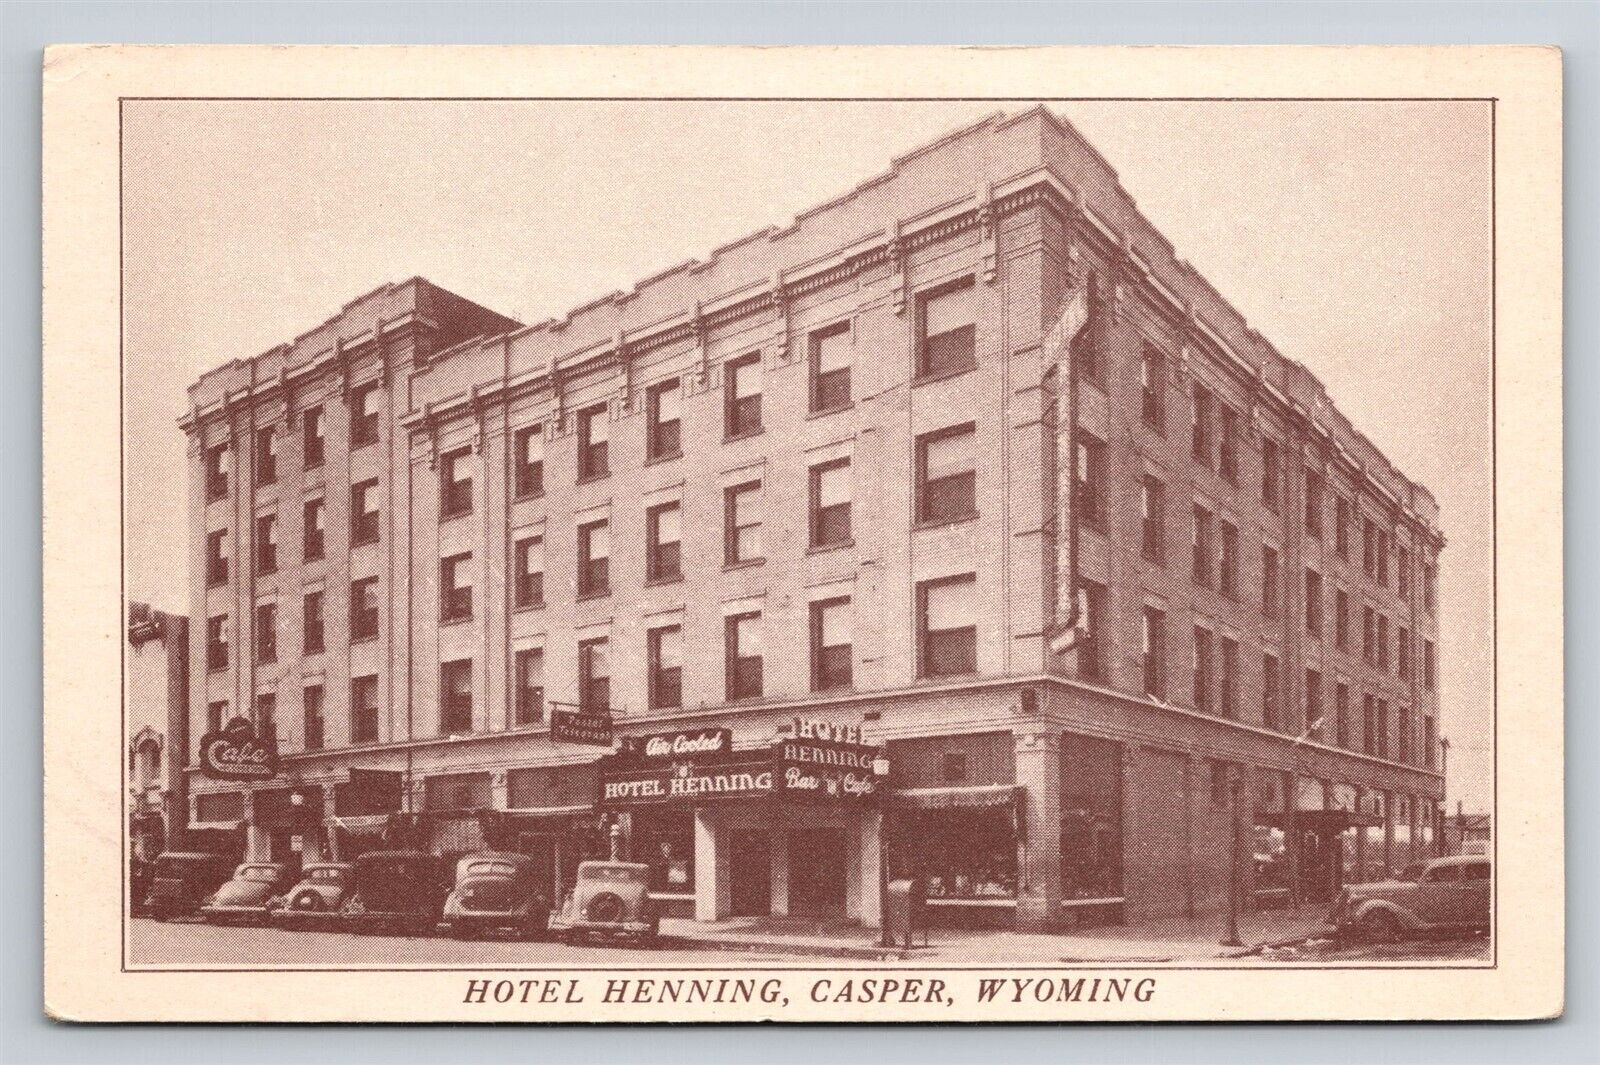 Casper Wyoming WY Hotel Henning Sign Old Cars Street Level View Vtg Postcard